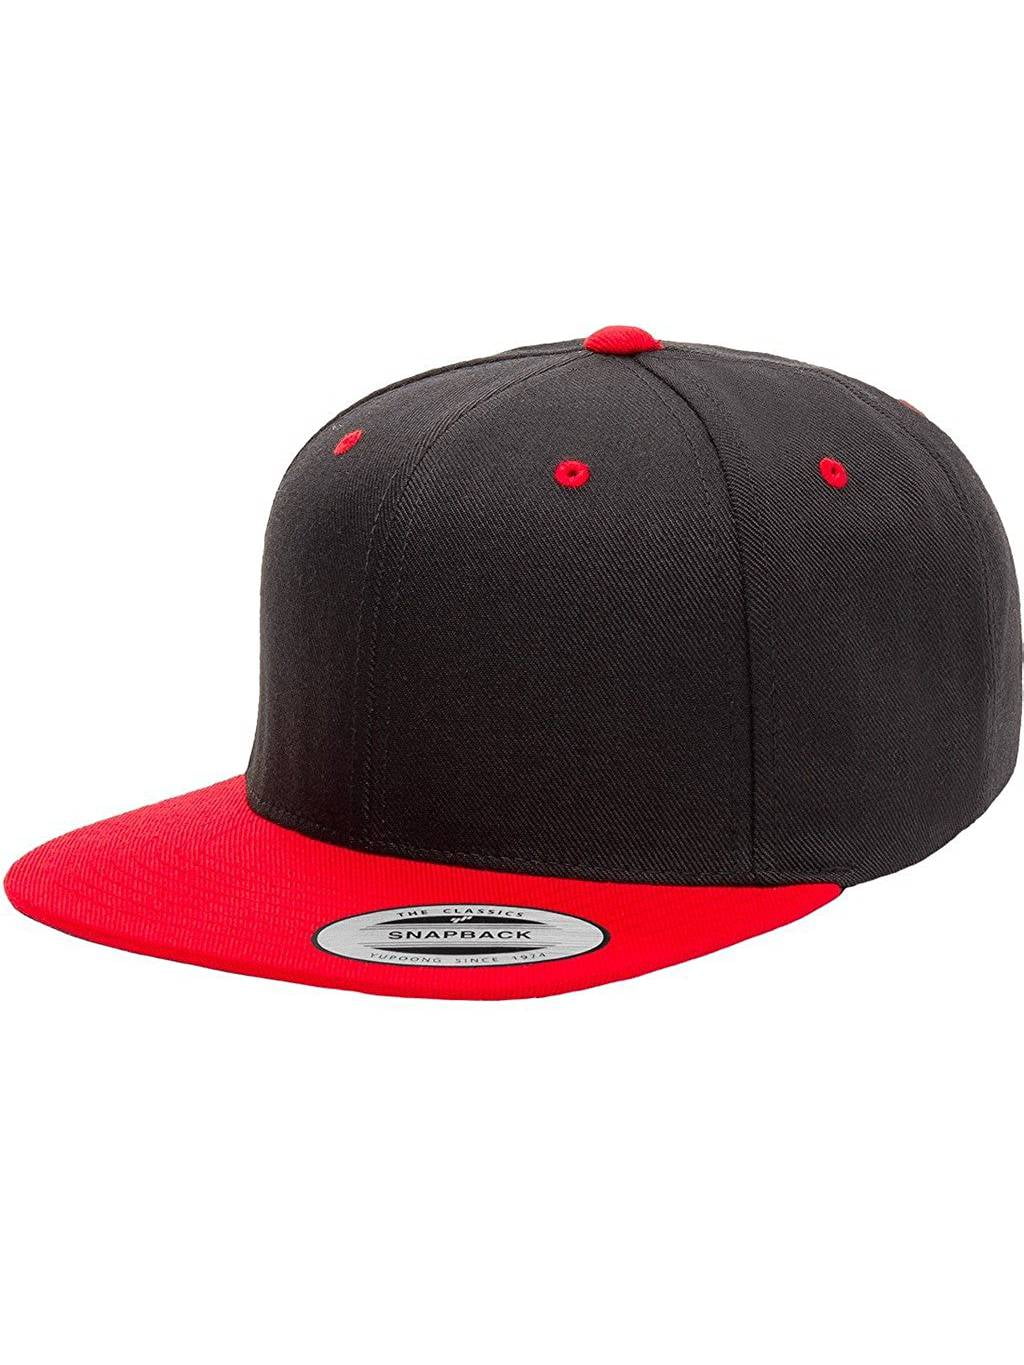 Yupoong Classic Style 6-Panel 2-Tone Snapback Cap, Black/Red